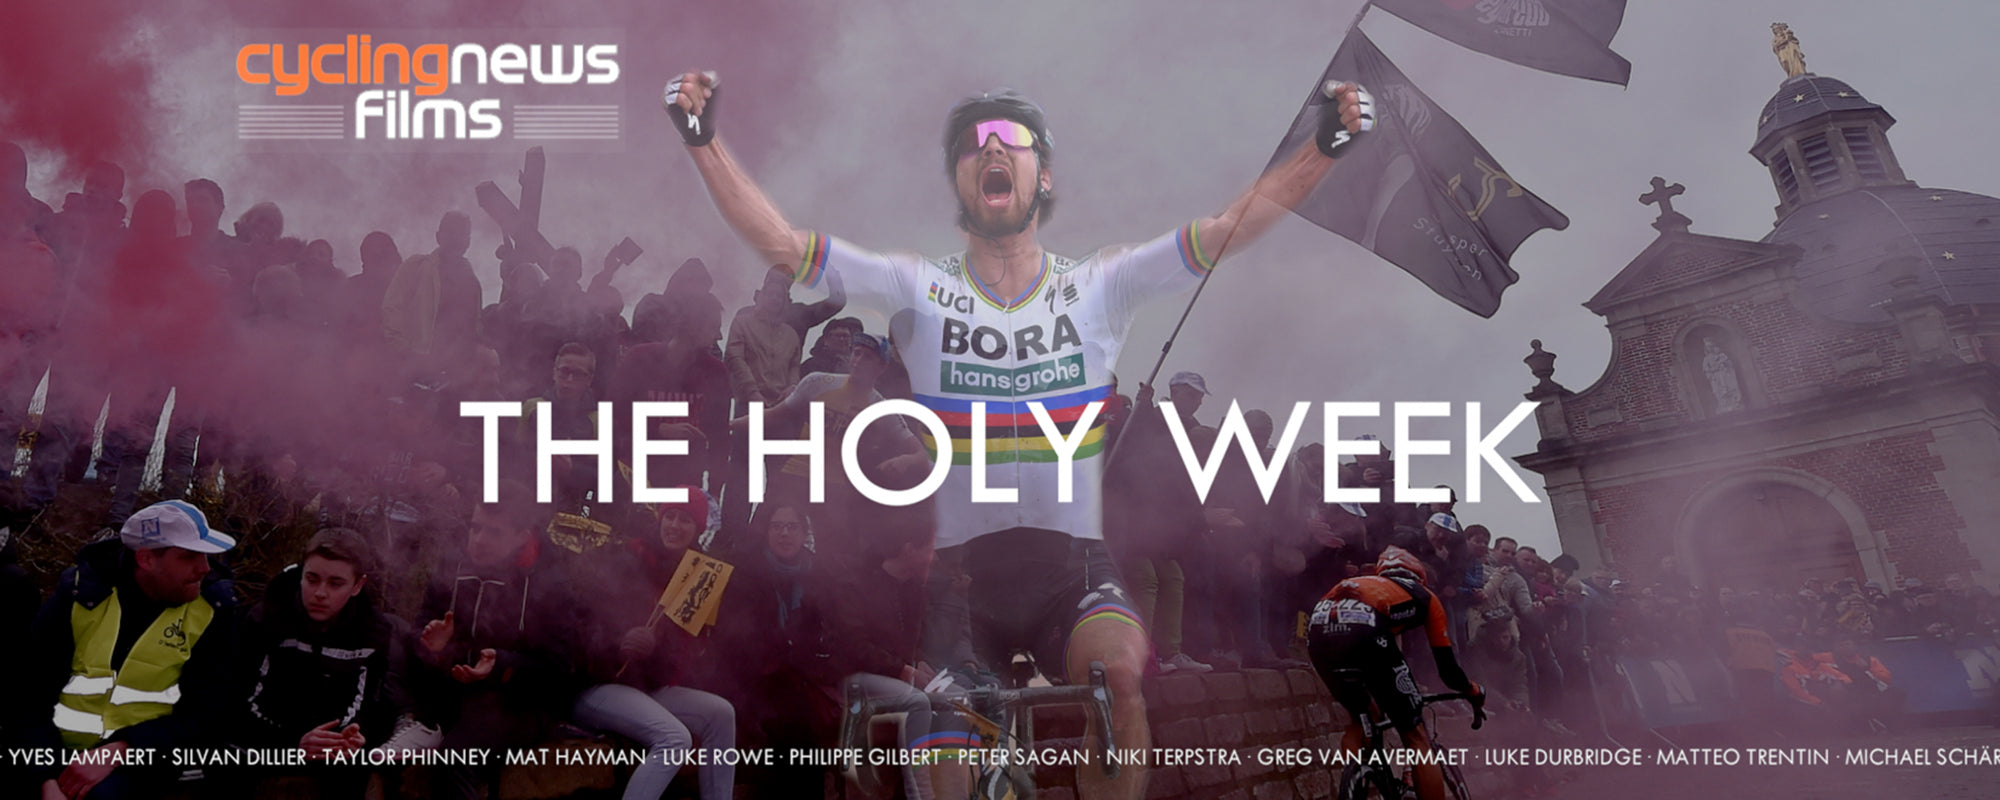 THE HOLY WEEK - from Cyclingnews Films